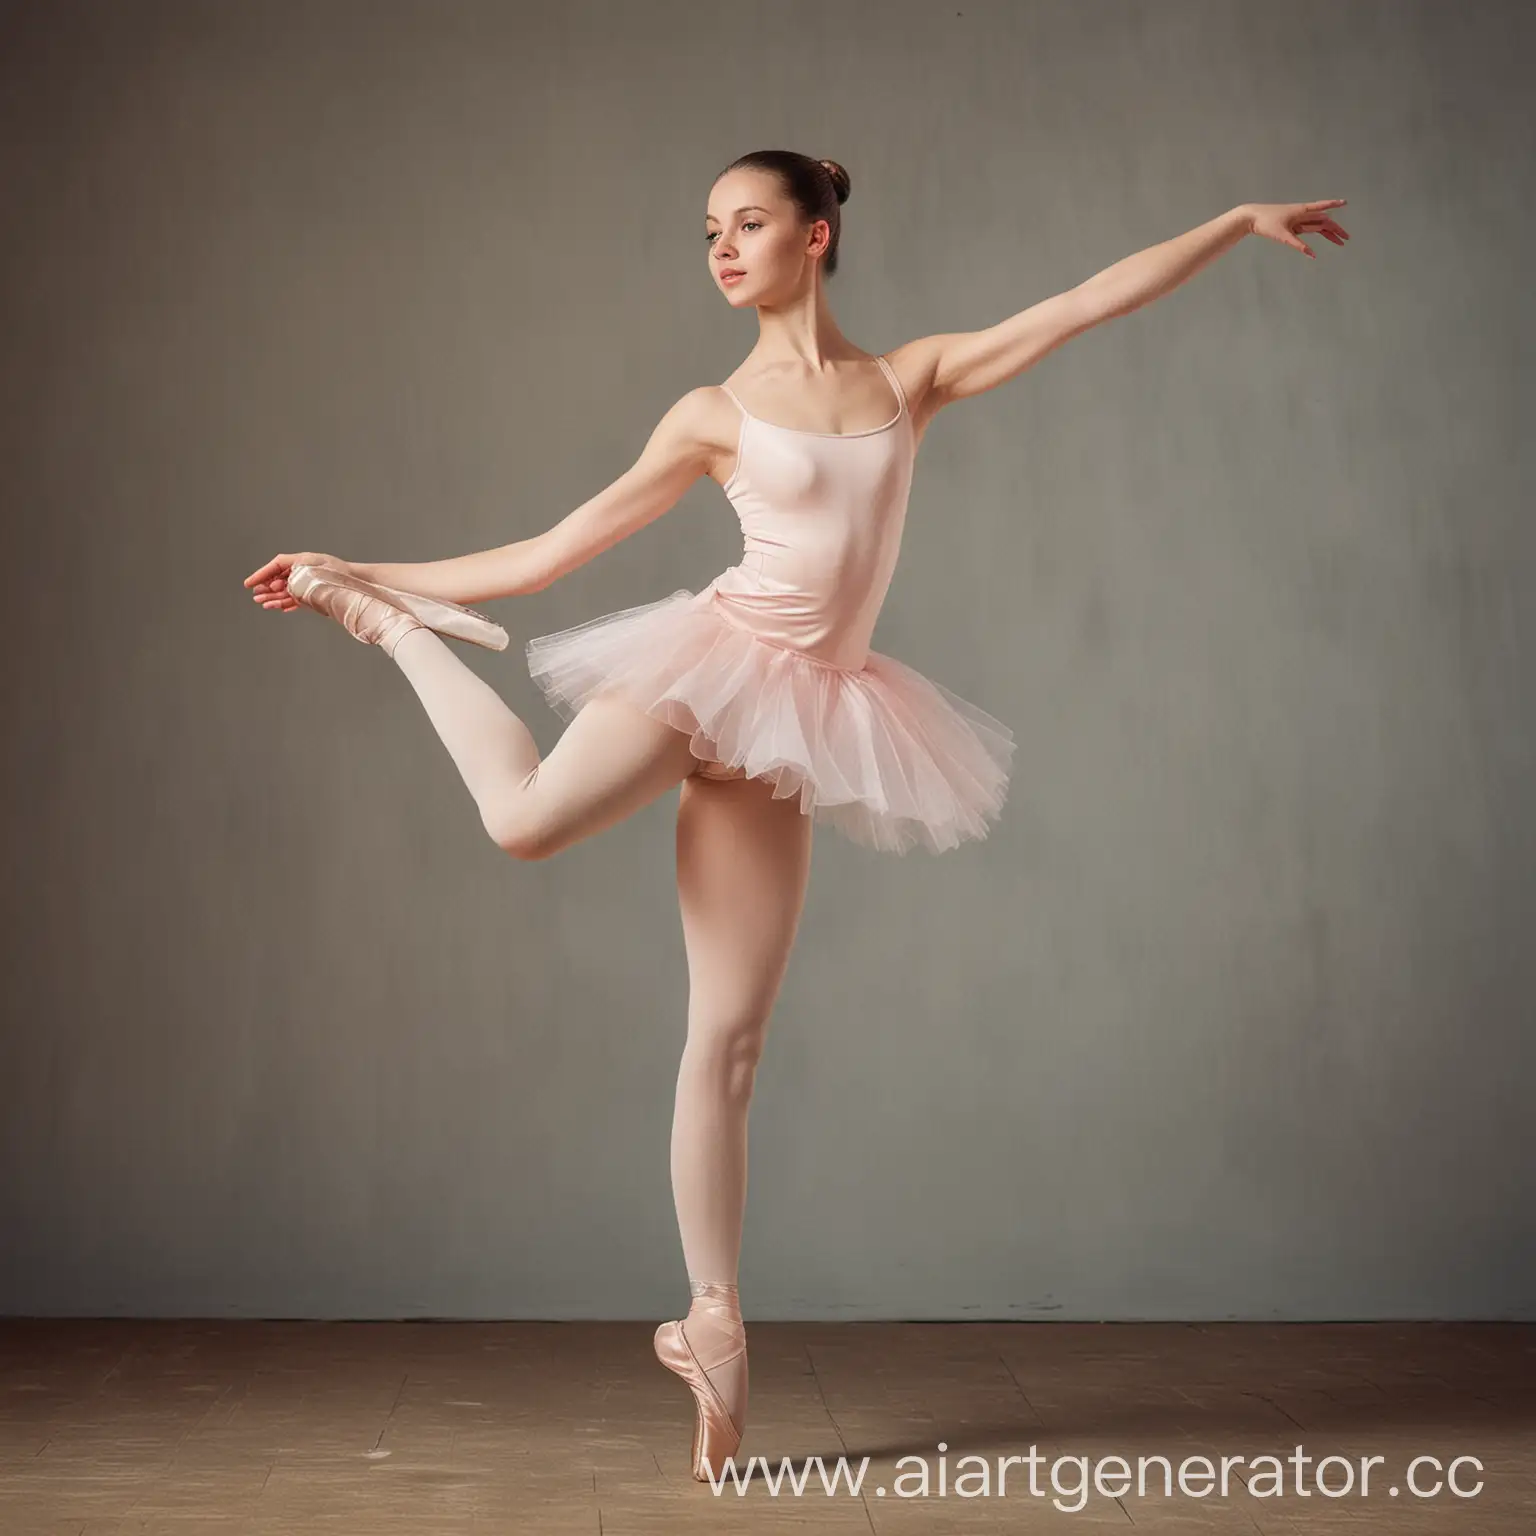 Graceful-Young-Ballerina-Standing-on-Pointe-Shoes